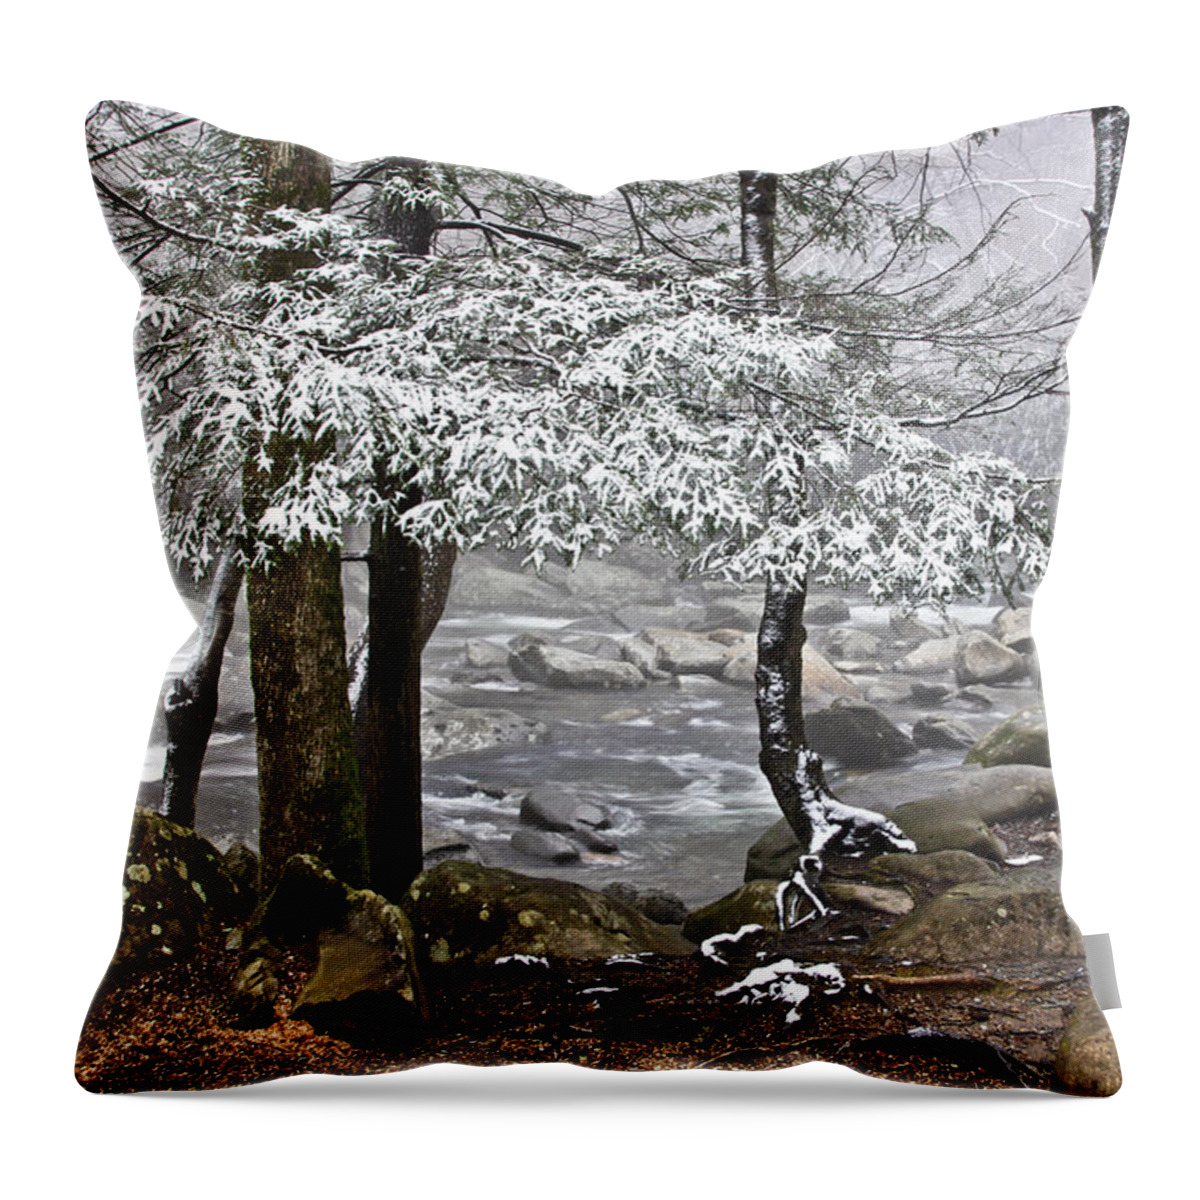 Landscape Throw Pillow featuring the photograph Smoky Mountain Stream by Tom and Pat Cory